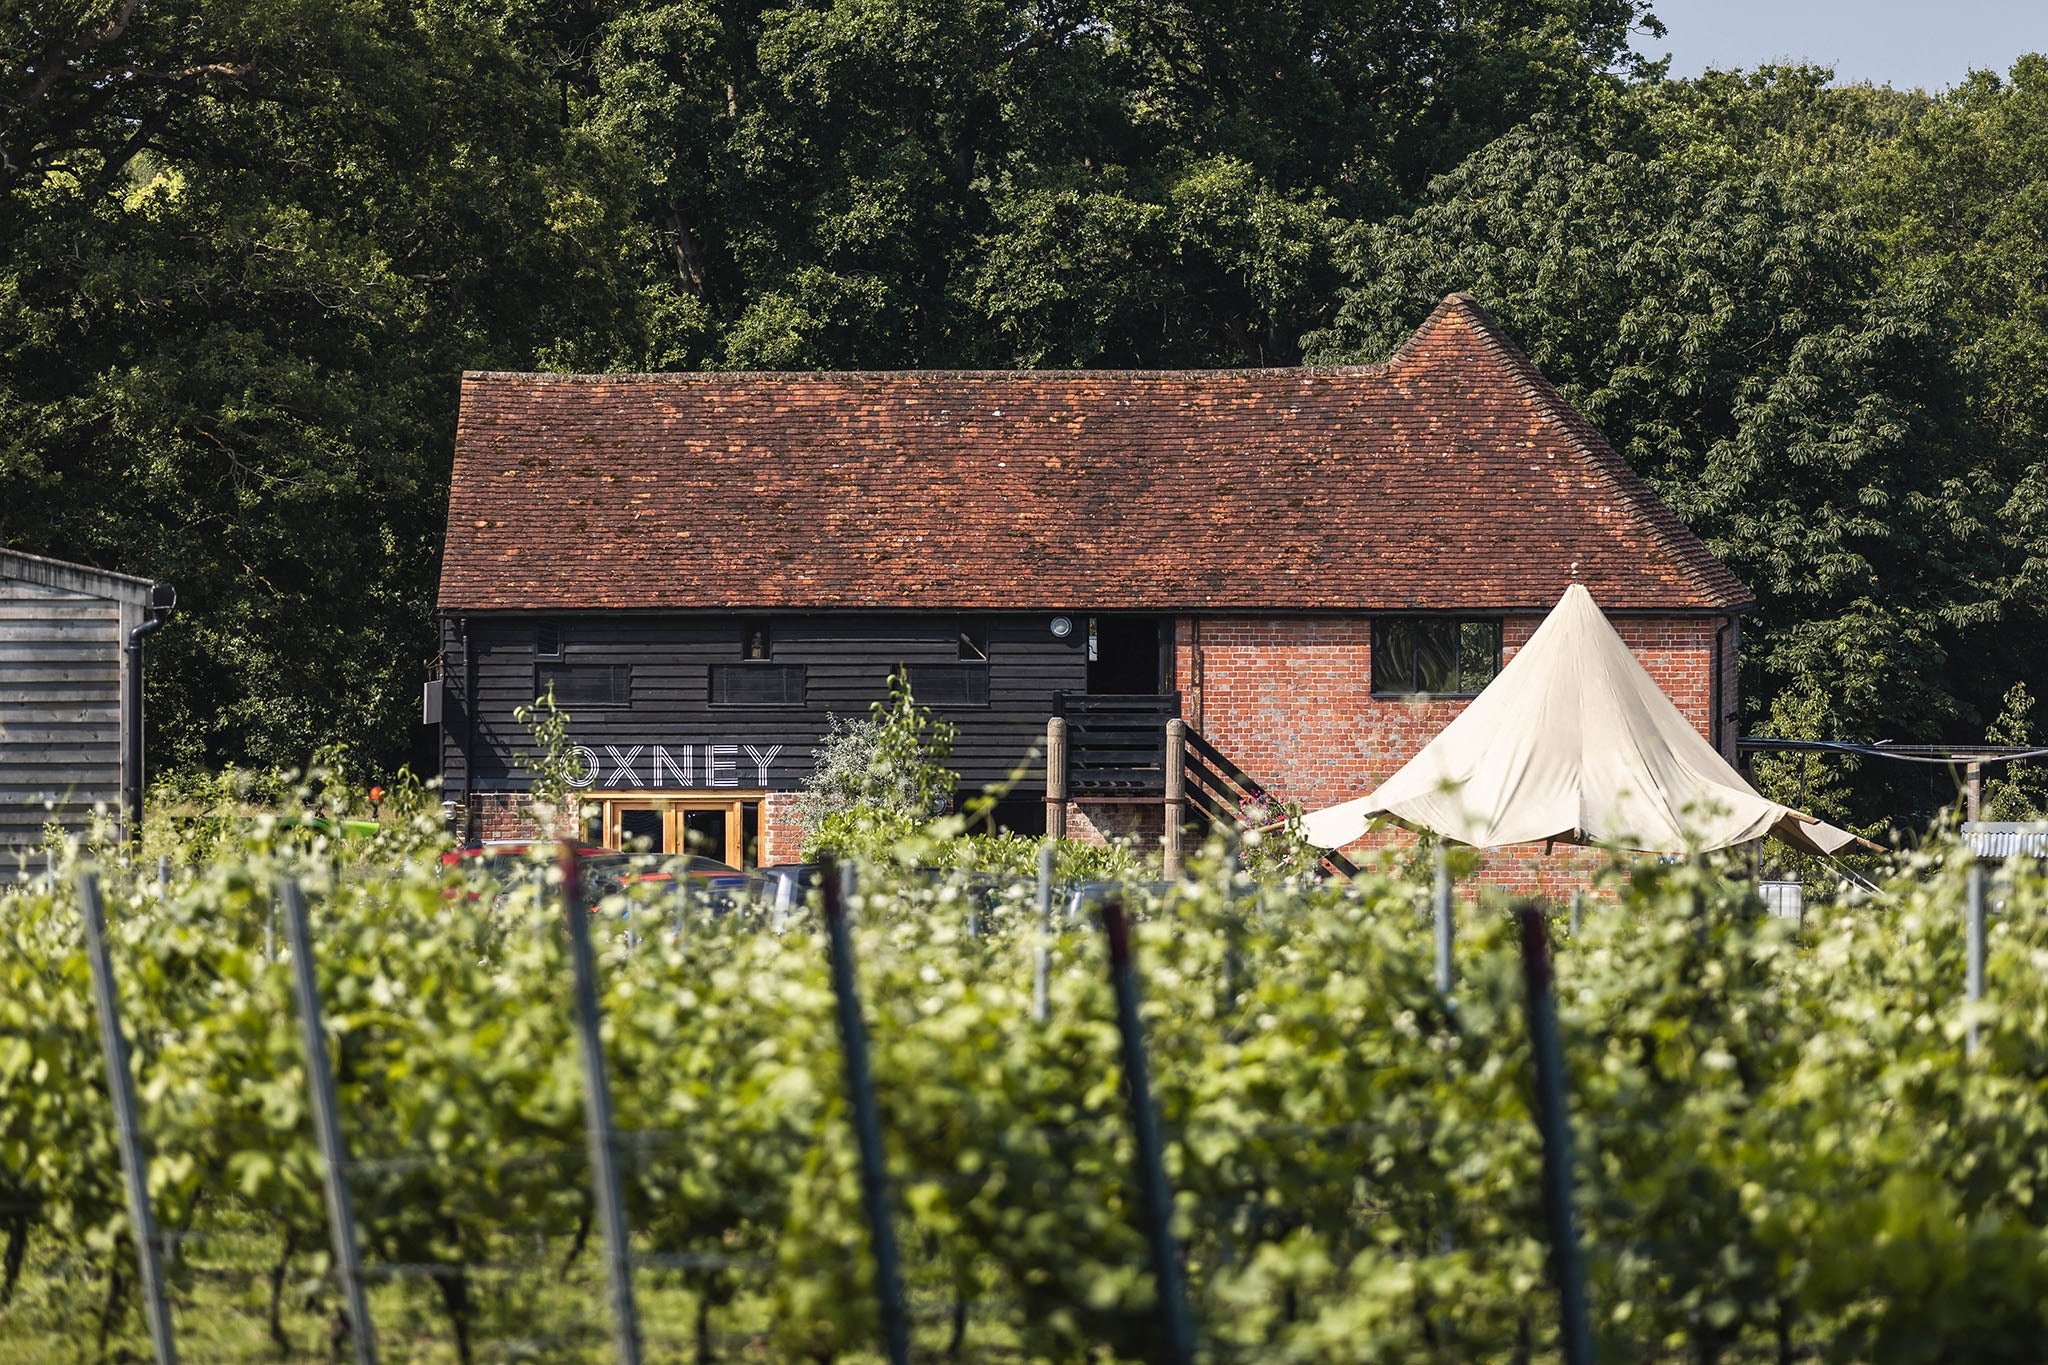 Oxney is famous for making some of the best organic wines in the country